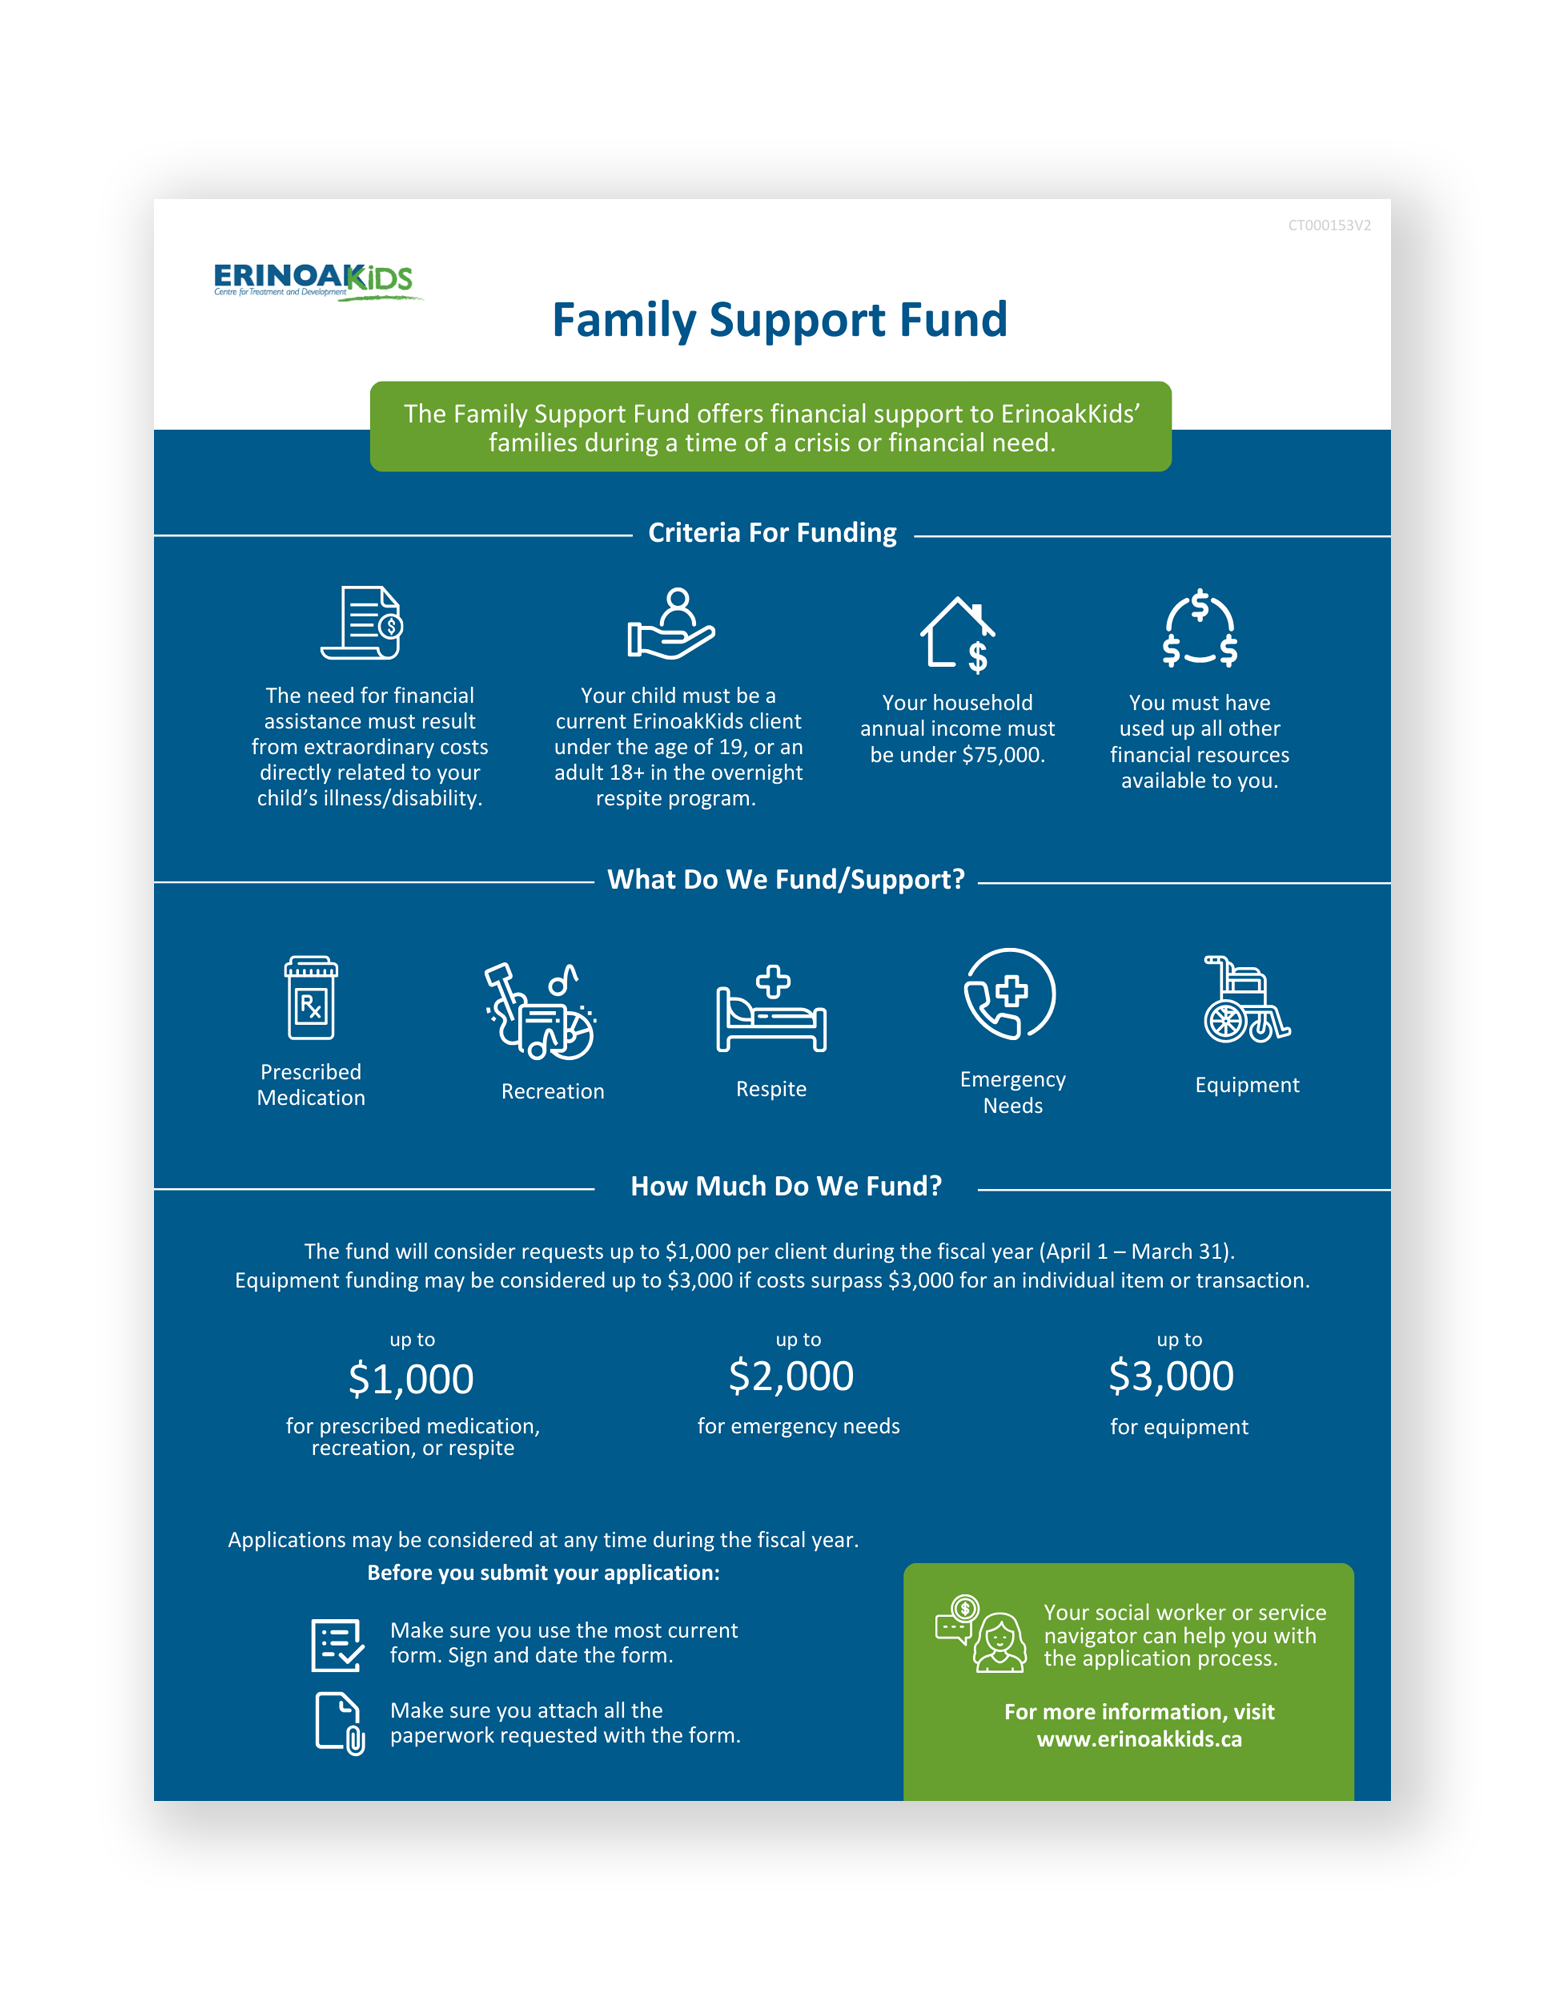 Thumbnail of the Family Support Fund infographic